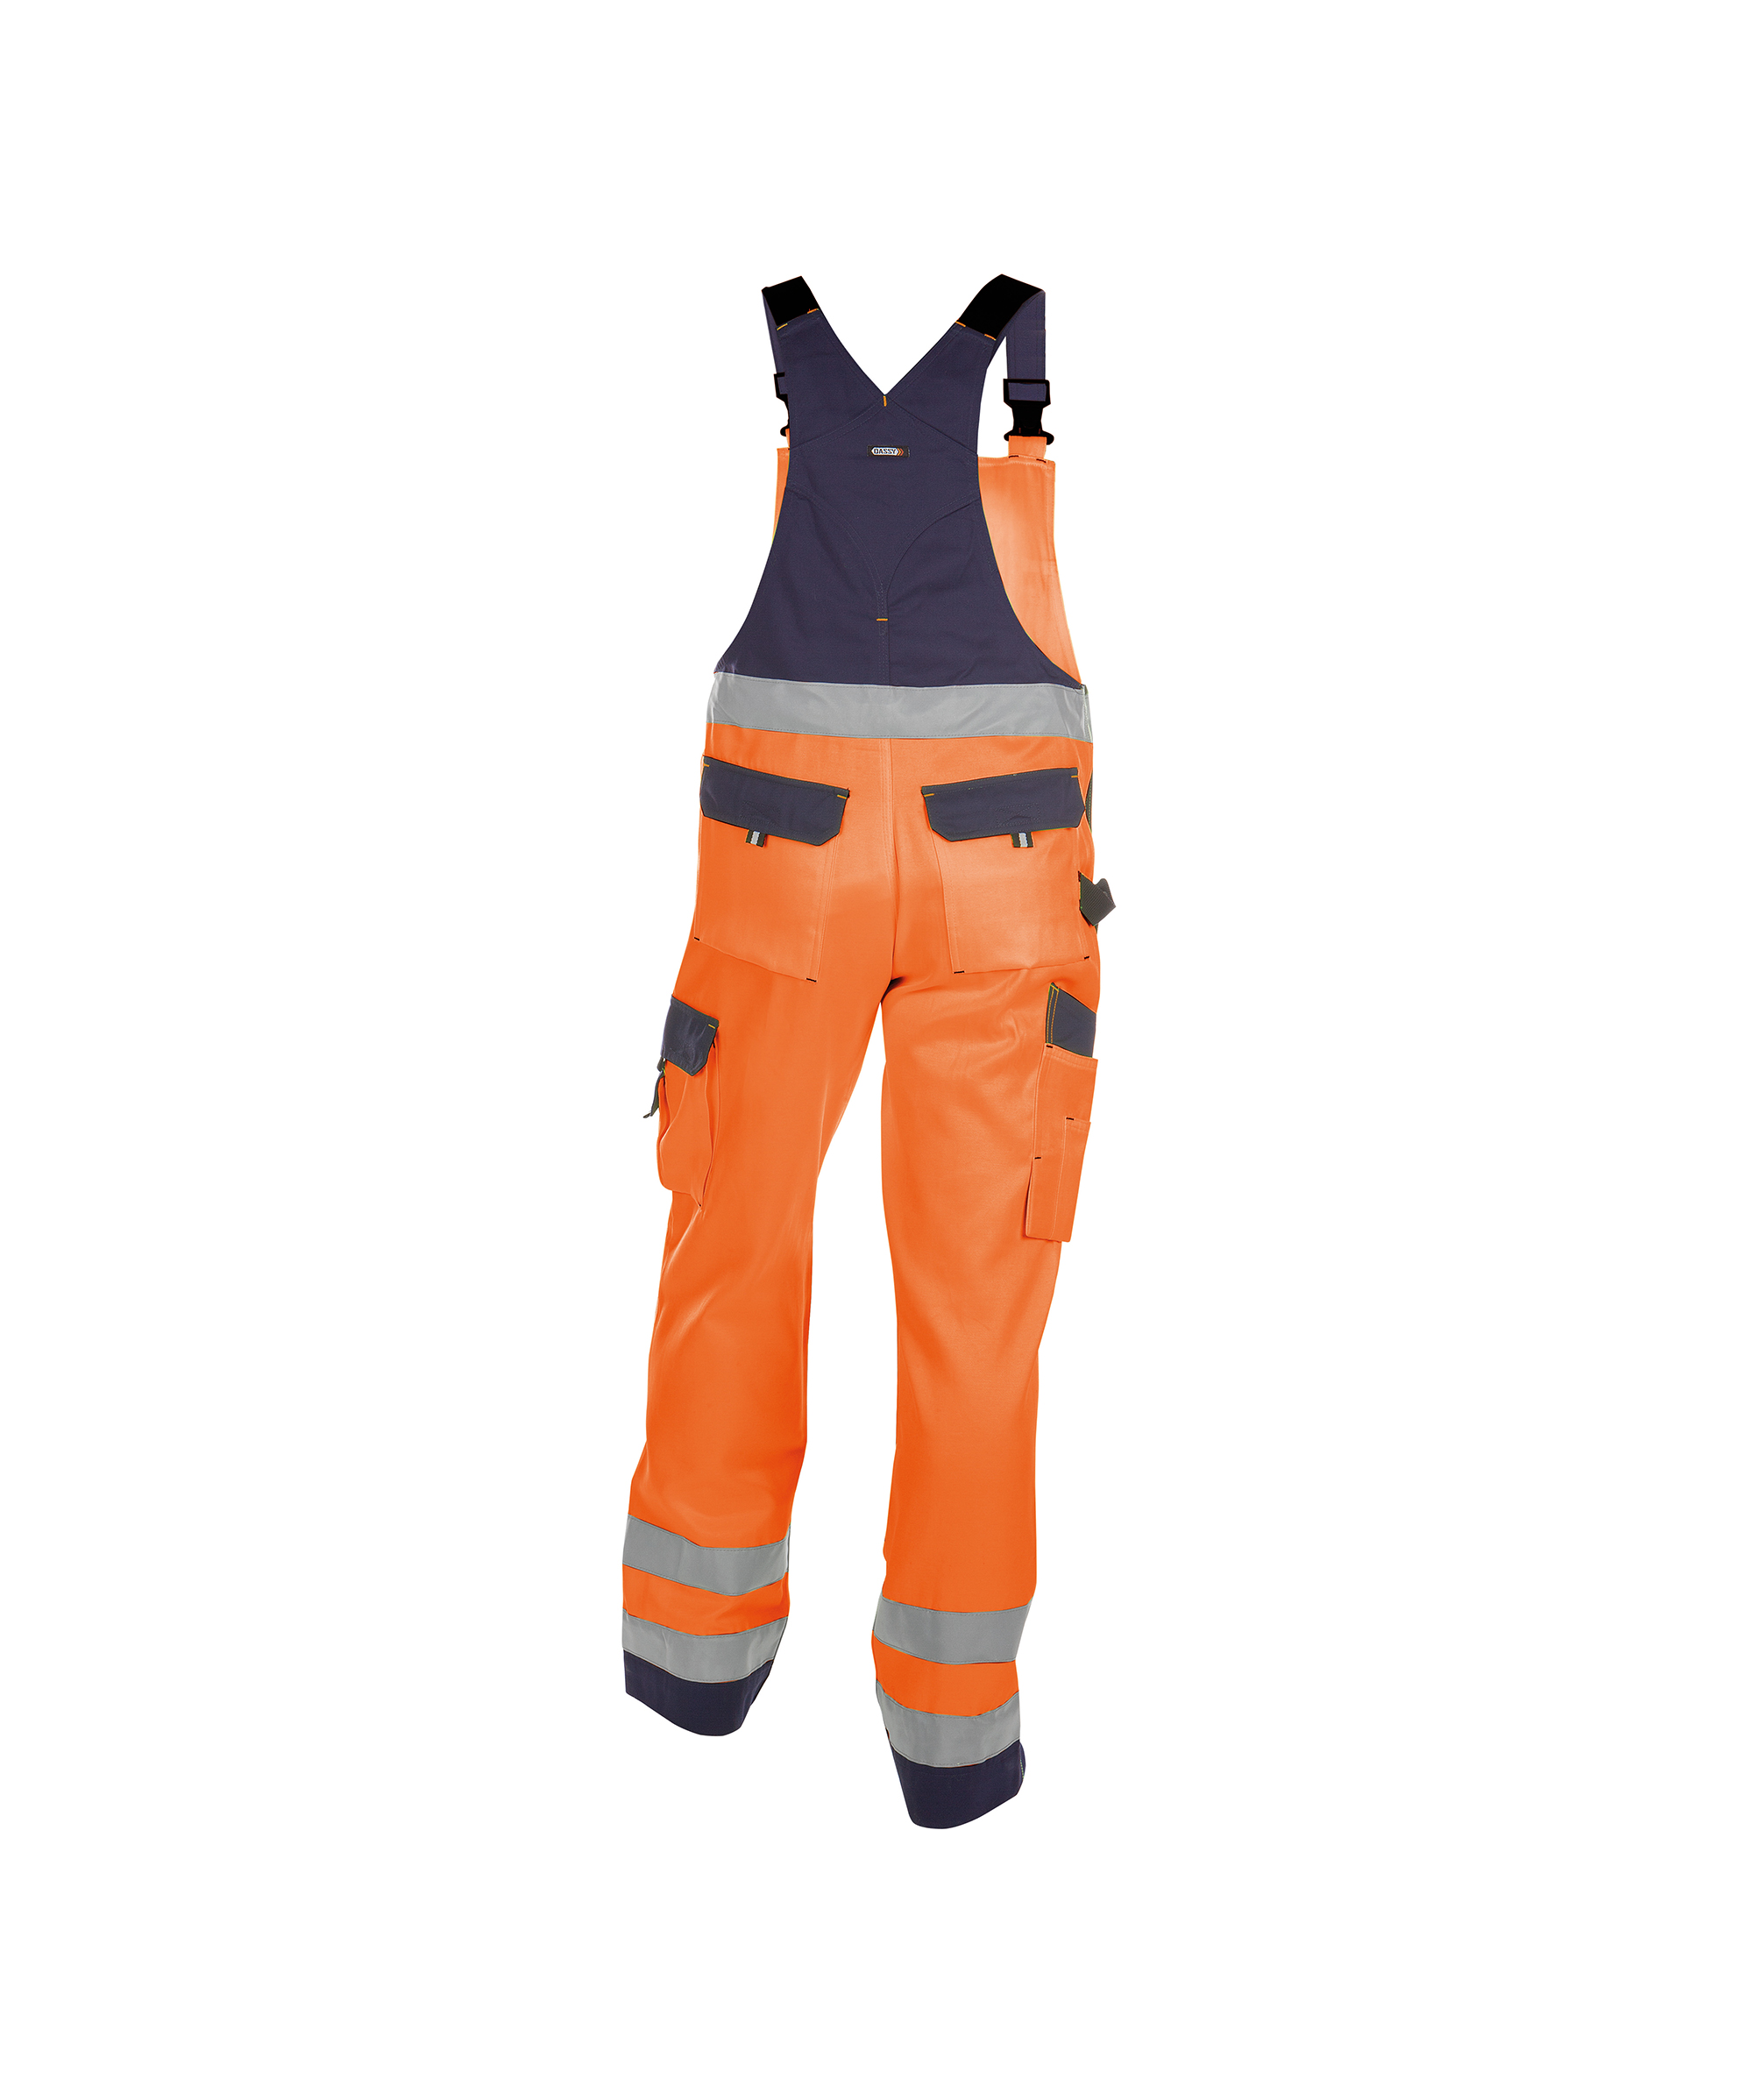 toulouse_high-visibility-brace-overall-with-knee-pockets_fluo-orange-navy_back.jpg